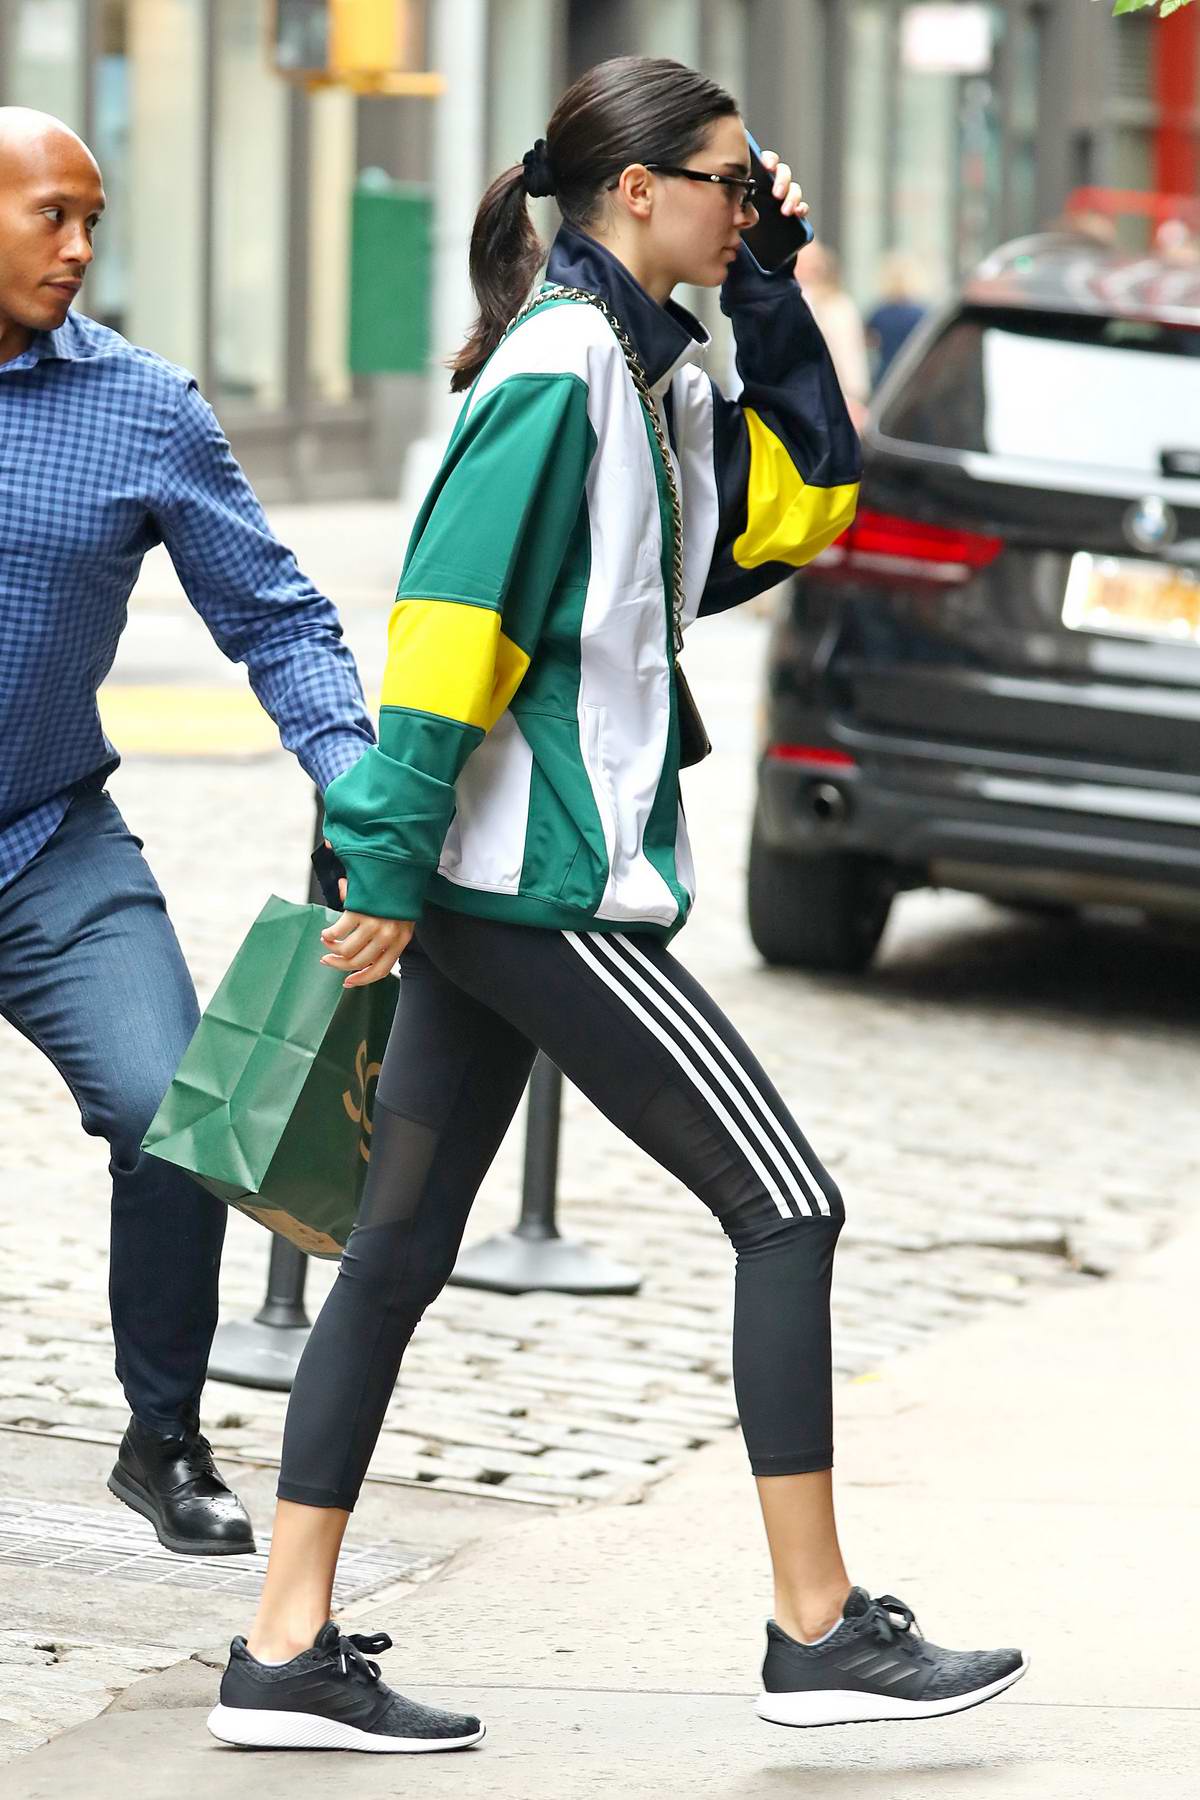 Kendall Jenner in lime yellow Adidas sneakers and black leggings